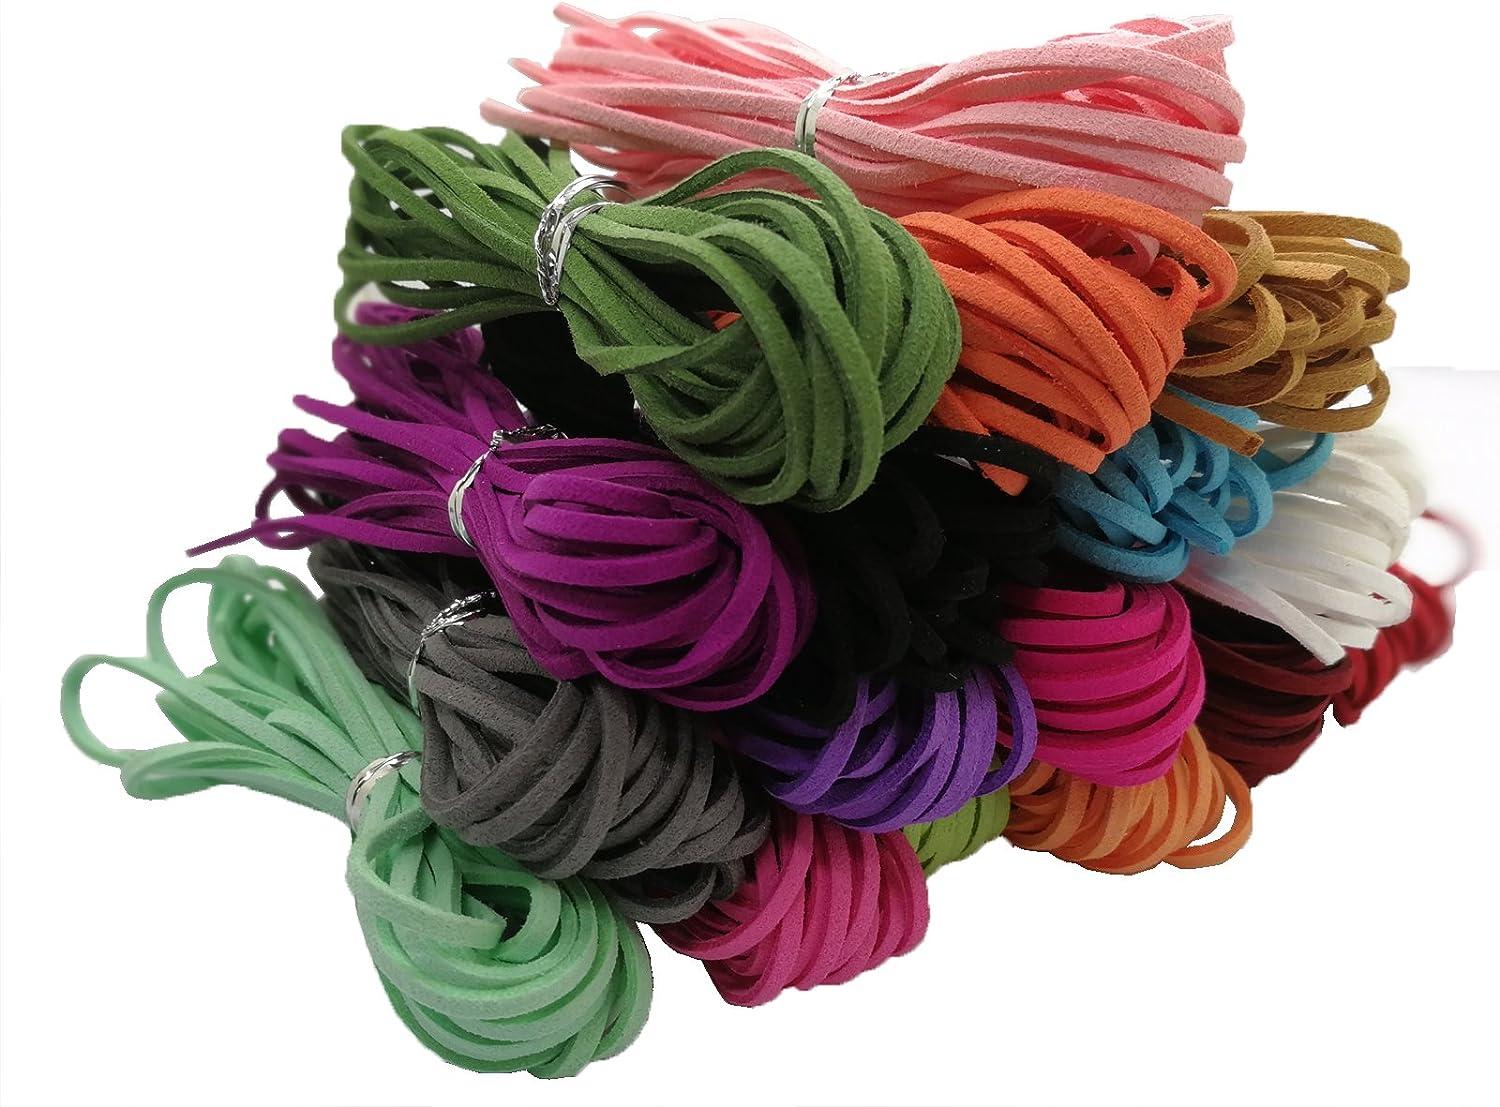 Velvet Finding Accessories, Suede Cord Jewelry Making